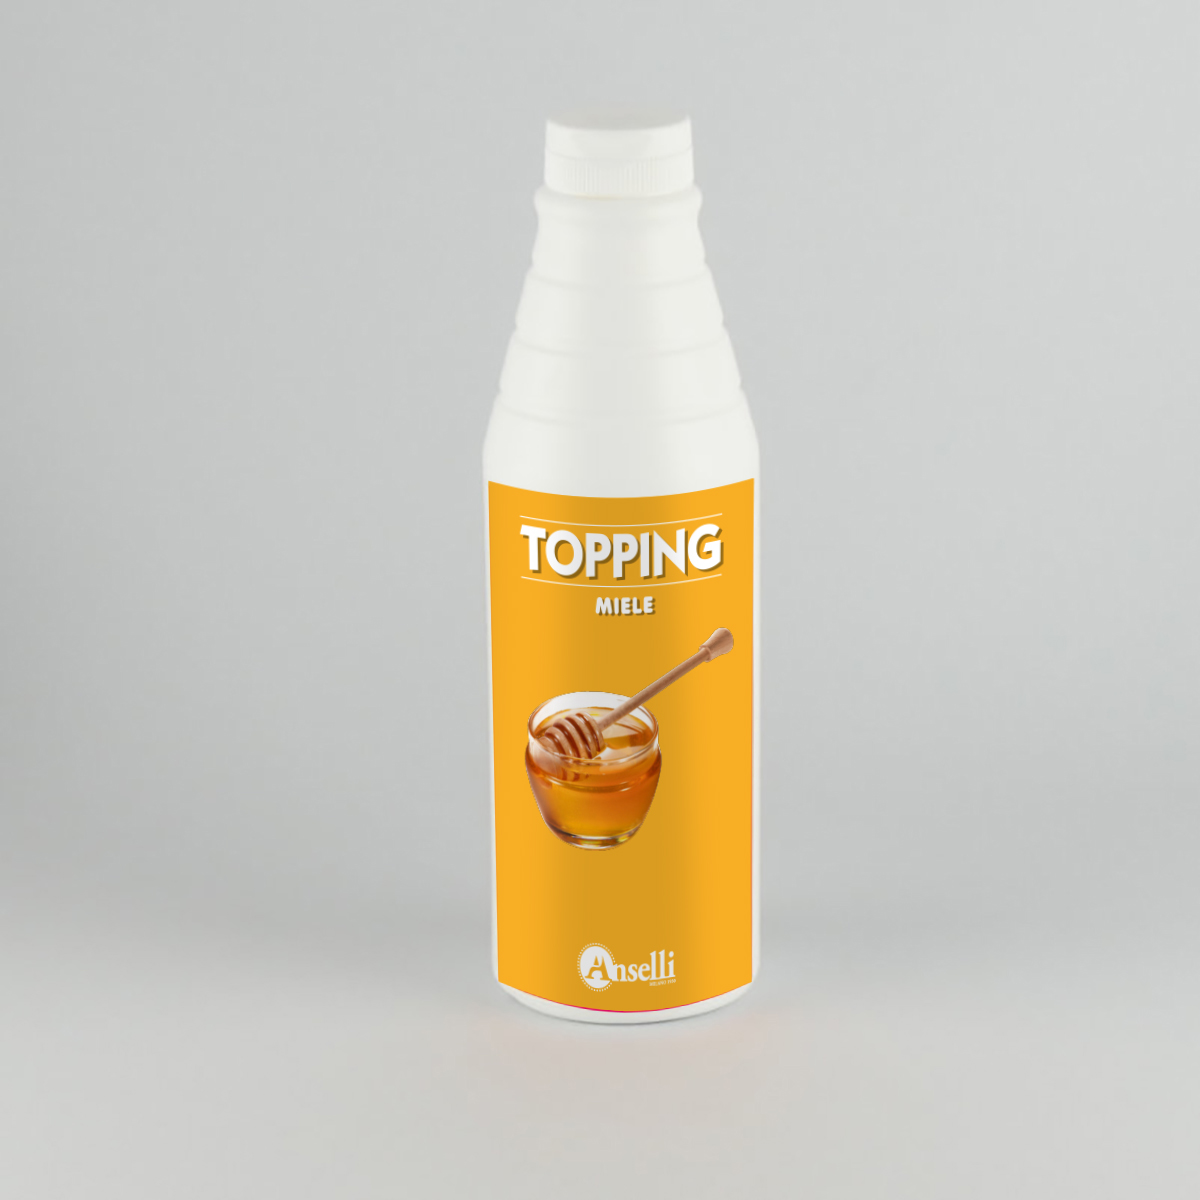 TOPPING MIELE